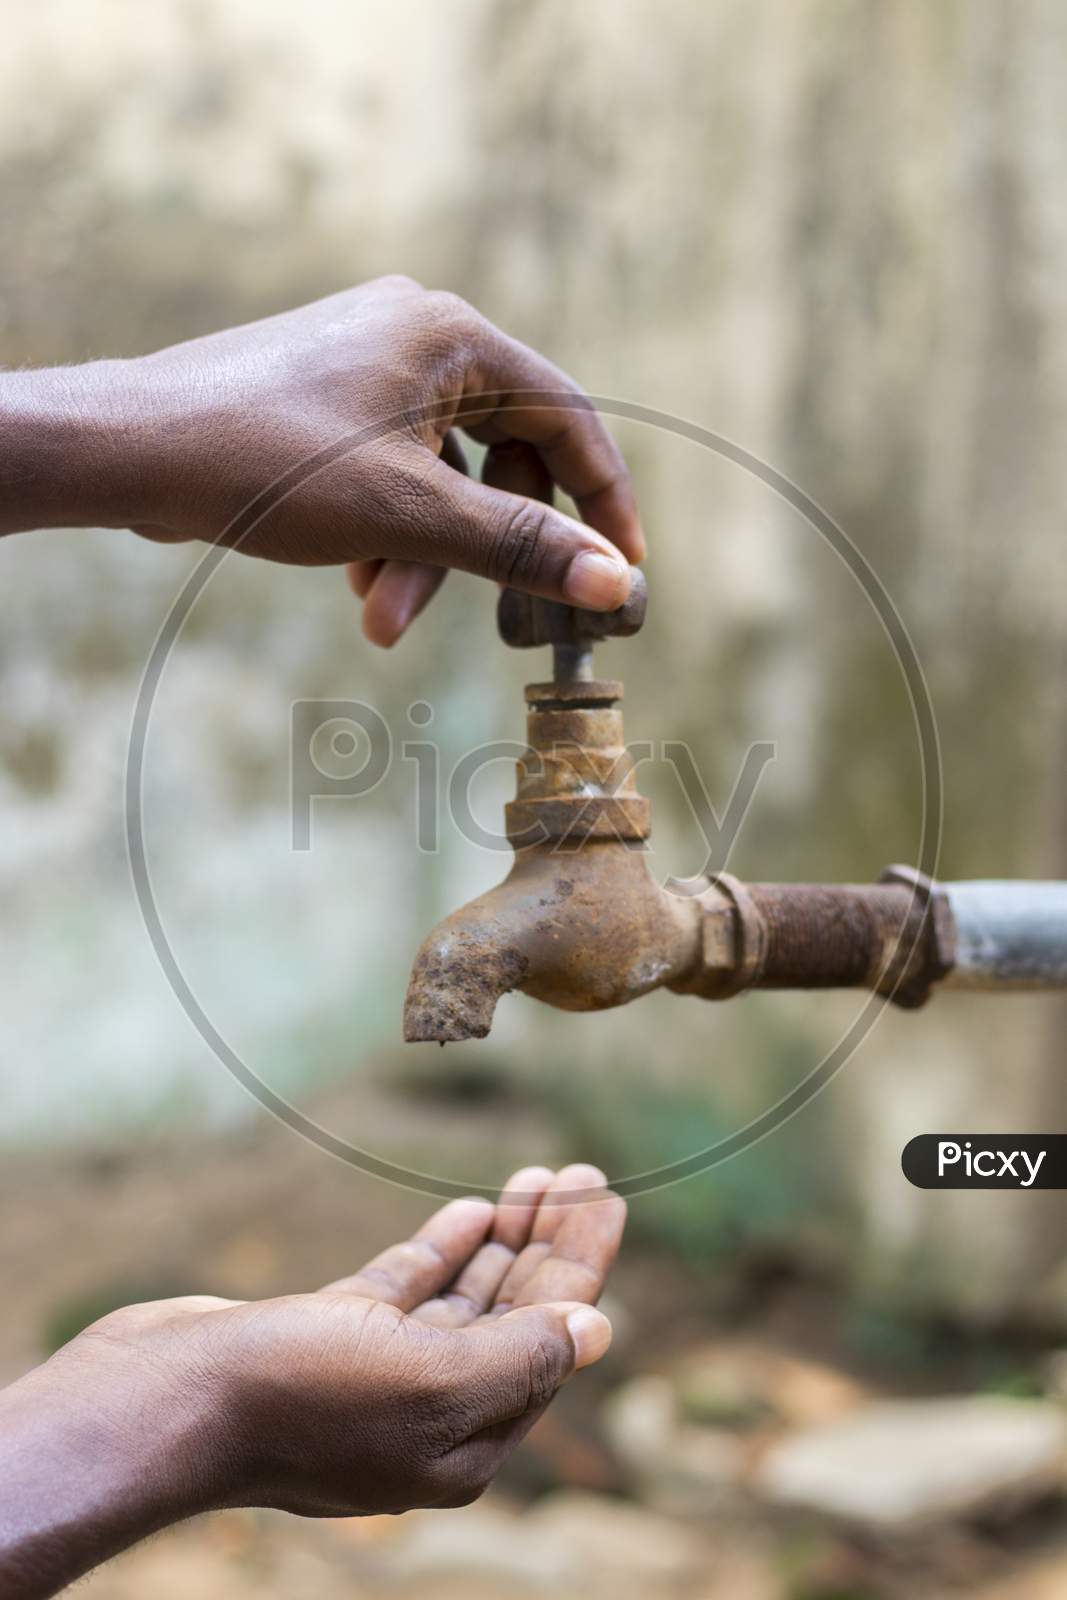 water crisis is a serious threat to India and worldwide,a man holding his hand under the tap for water